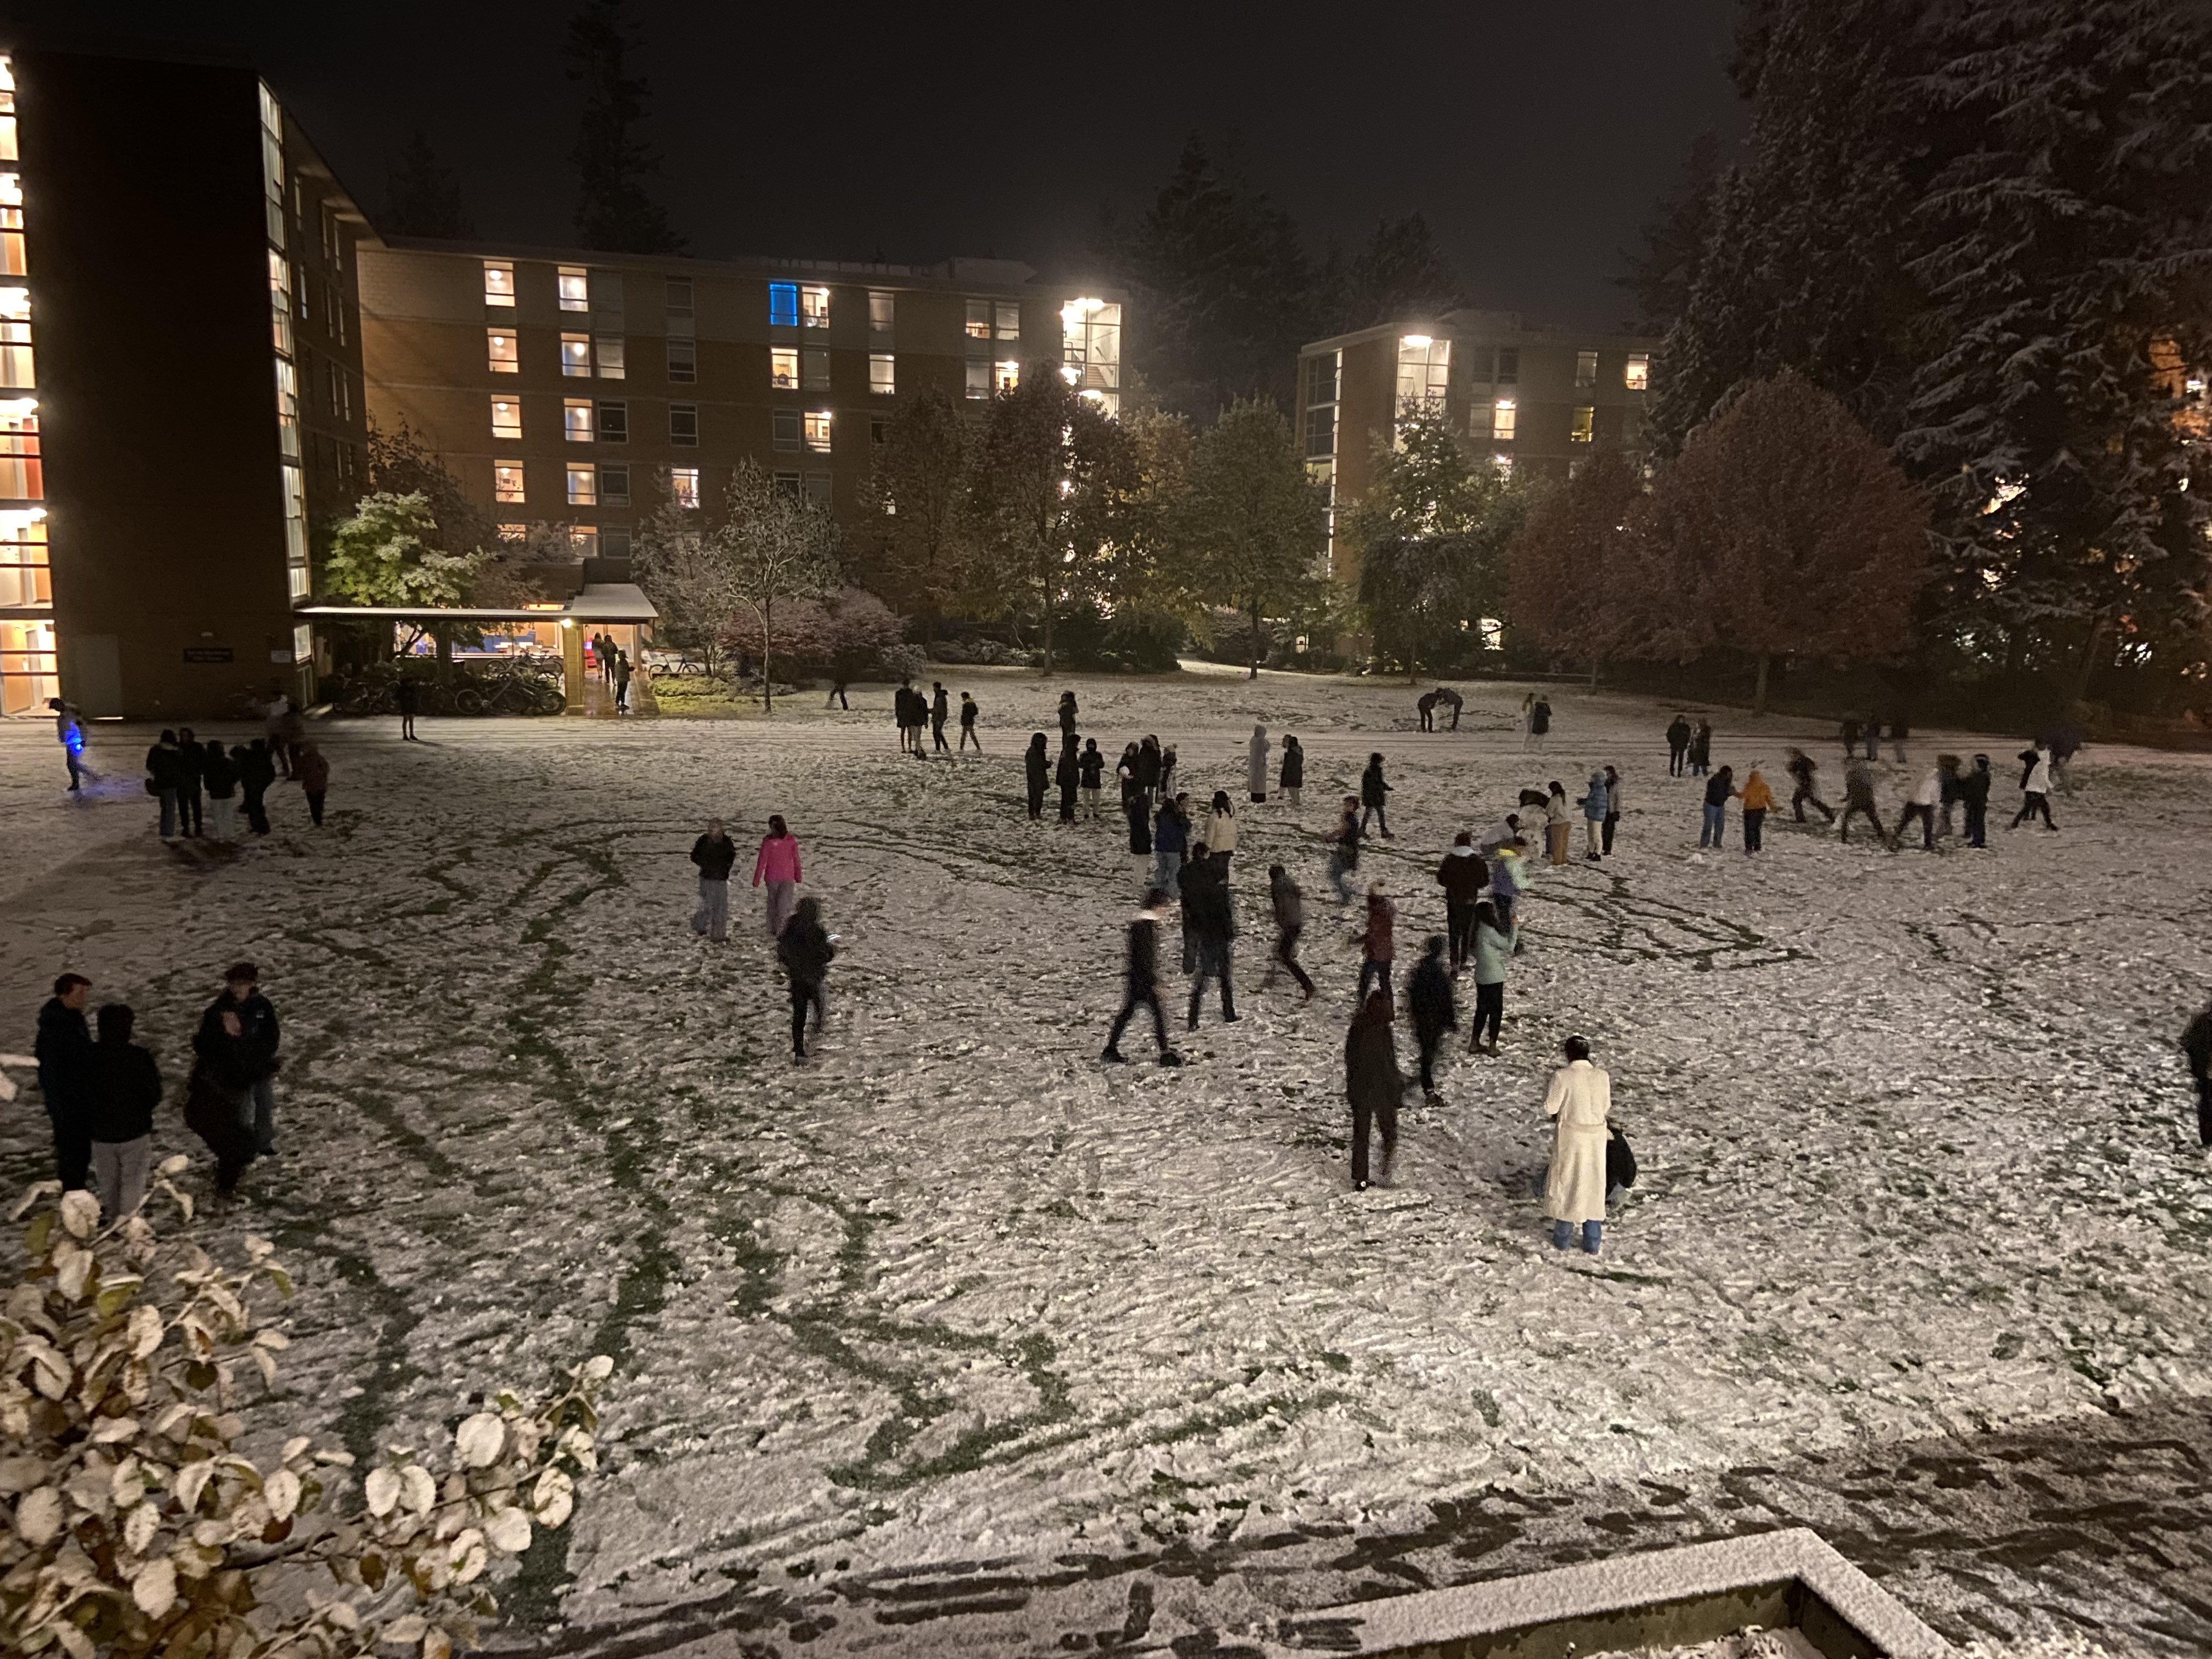 Students play in the snow as it falls on the Place Vanier lawn on November 7.